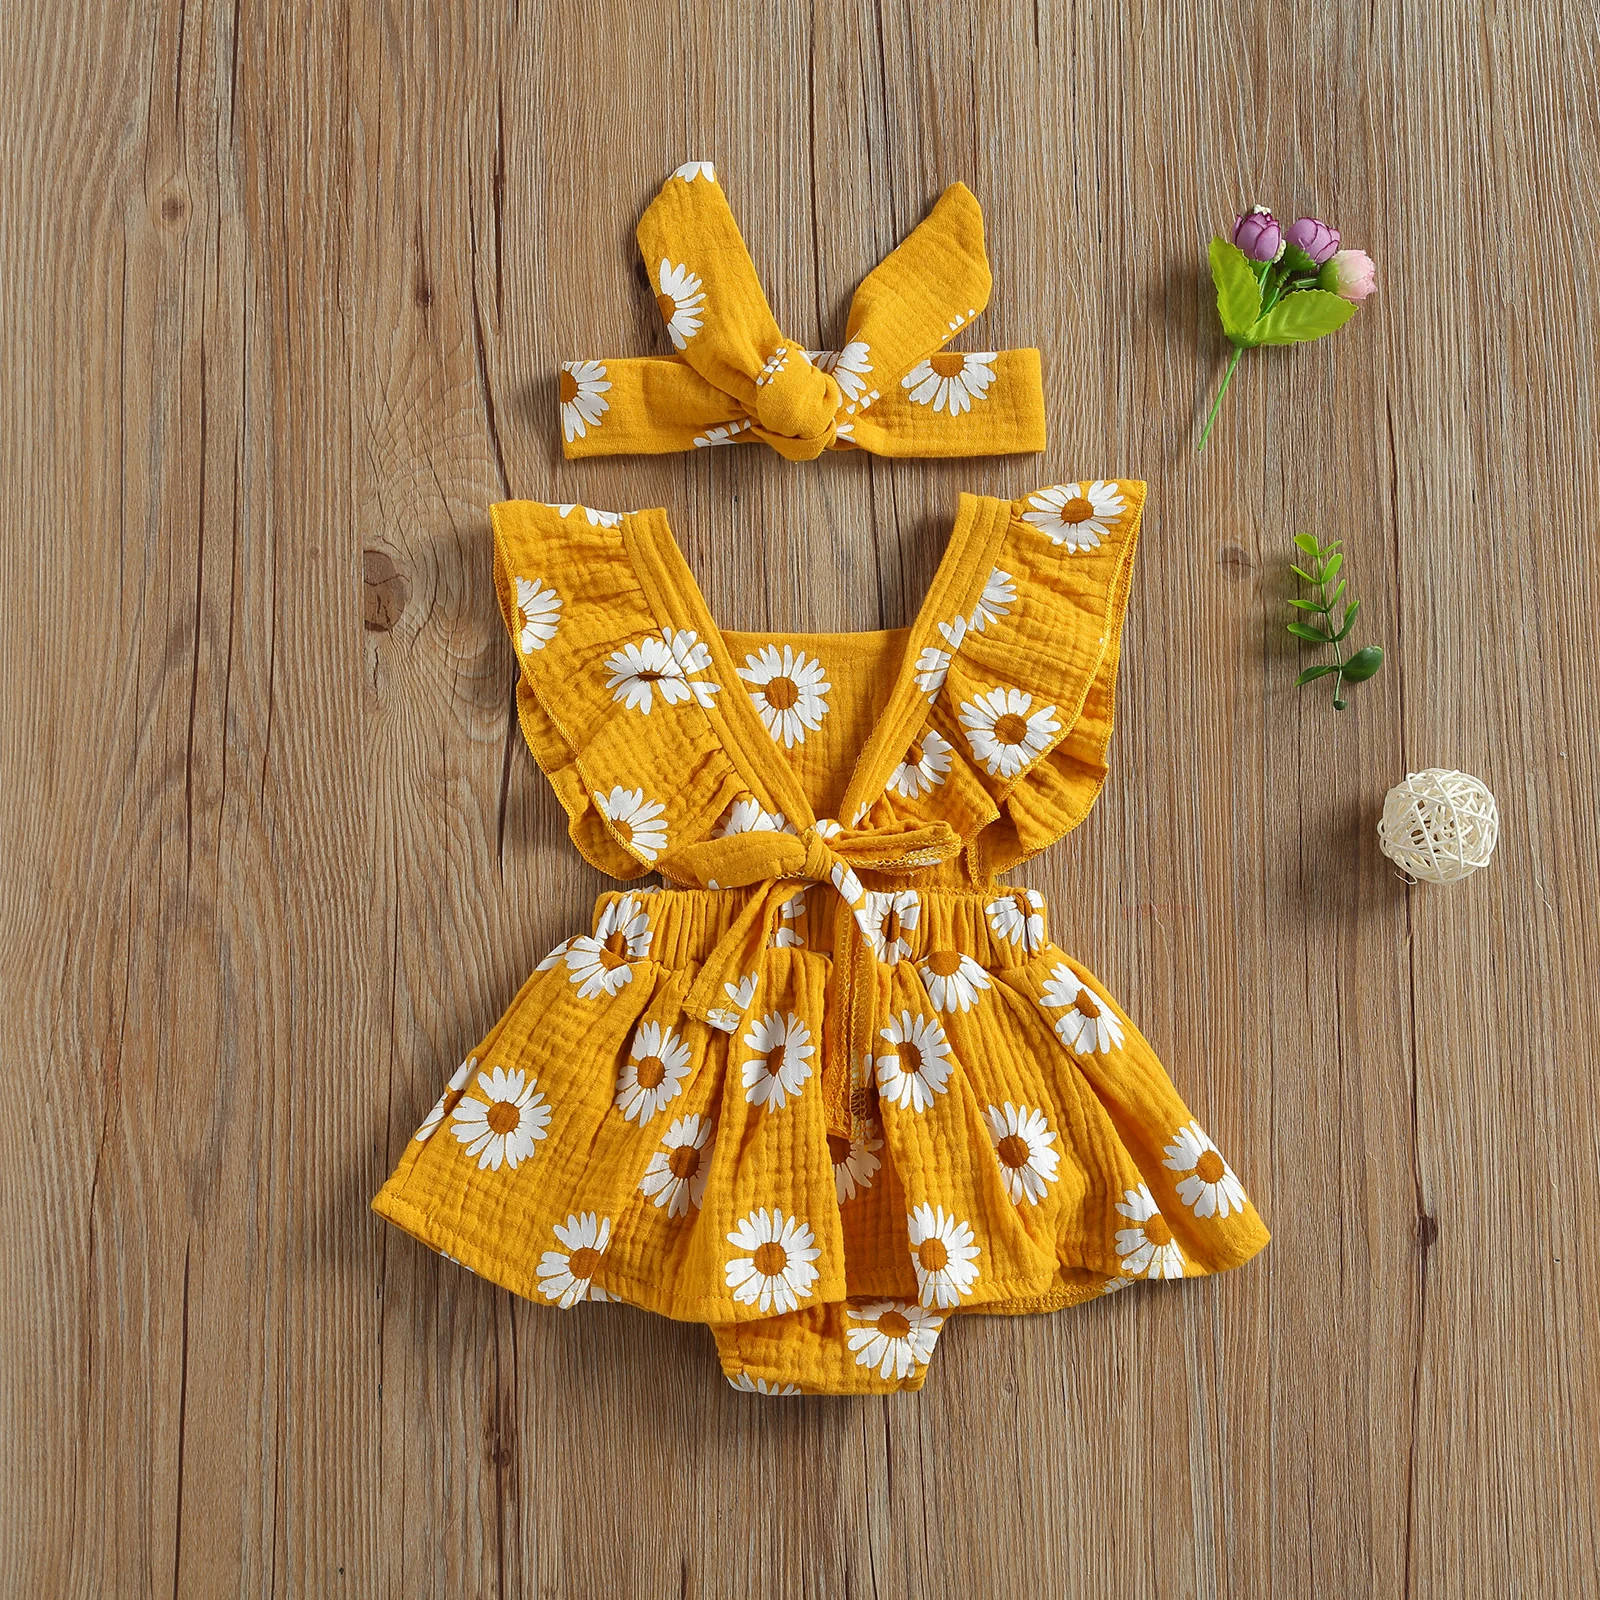 0-24M  Newborn Baby Girls Ruffle daisy r Romper Backcross Jumpsuit +Headband Outfits Sunsuit Baby Clothing Baby Bodysuits are cool